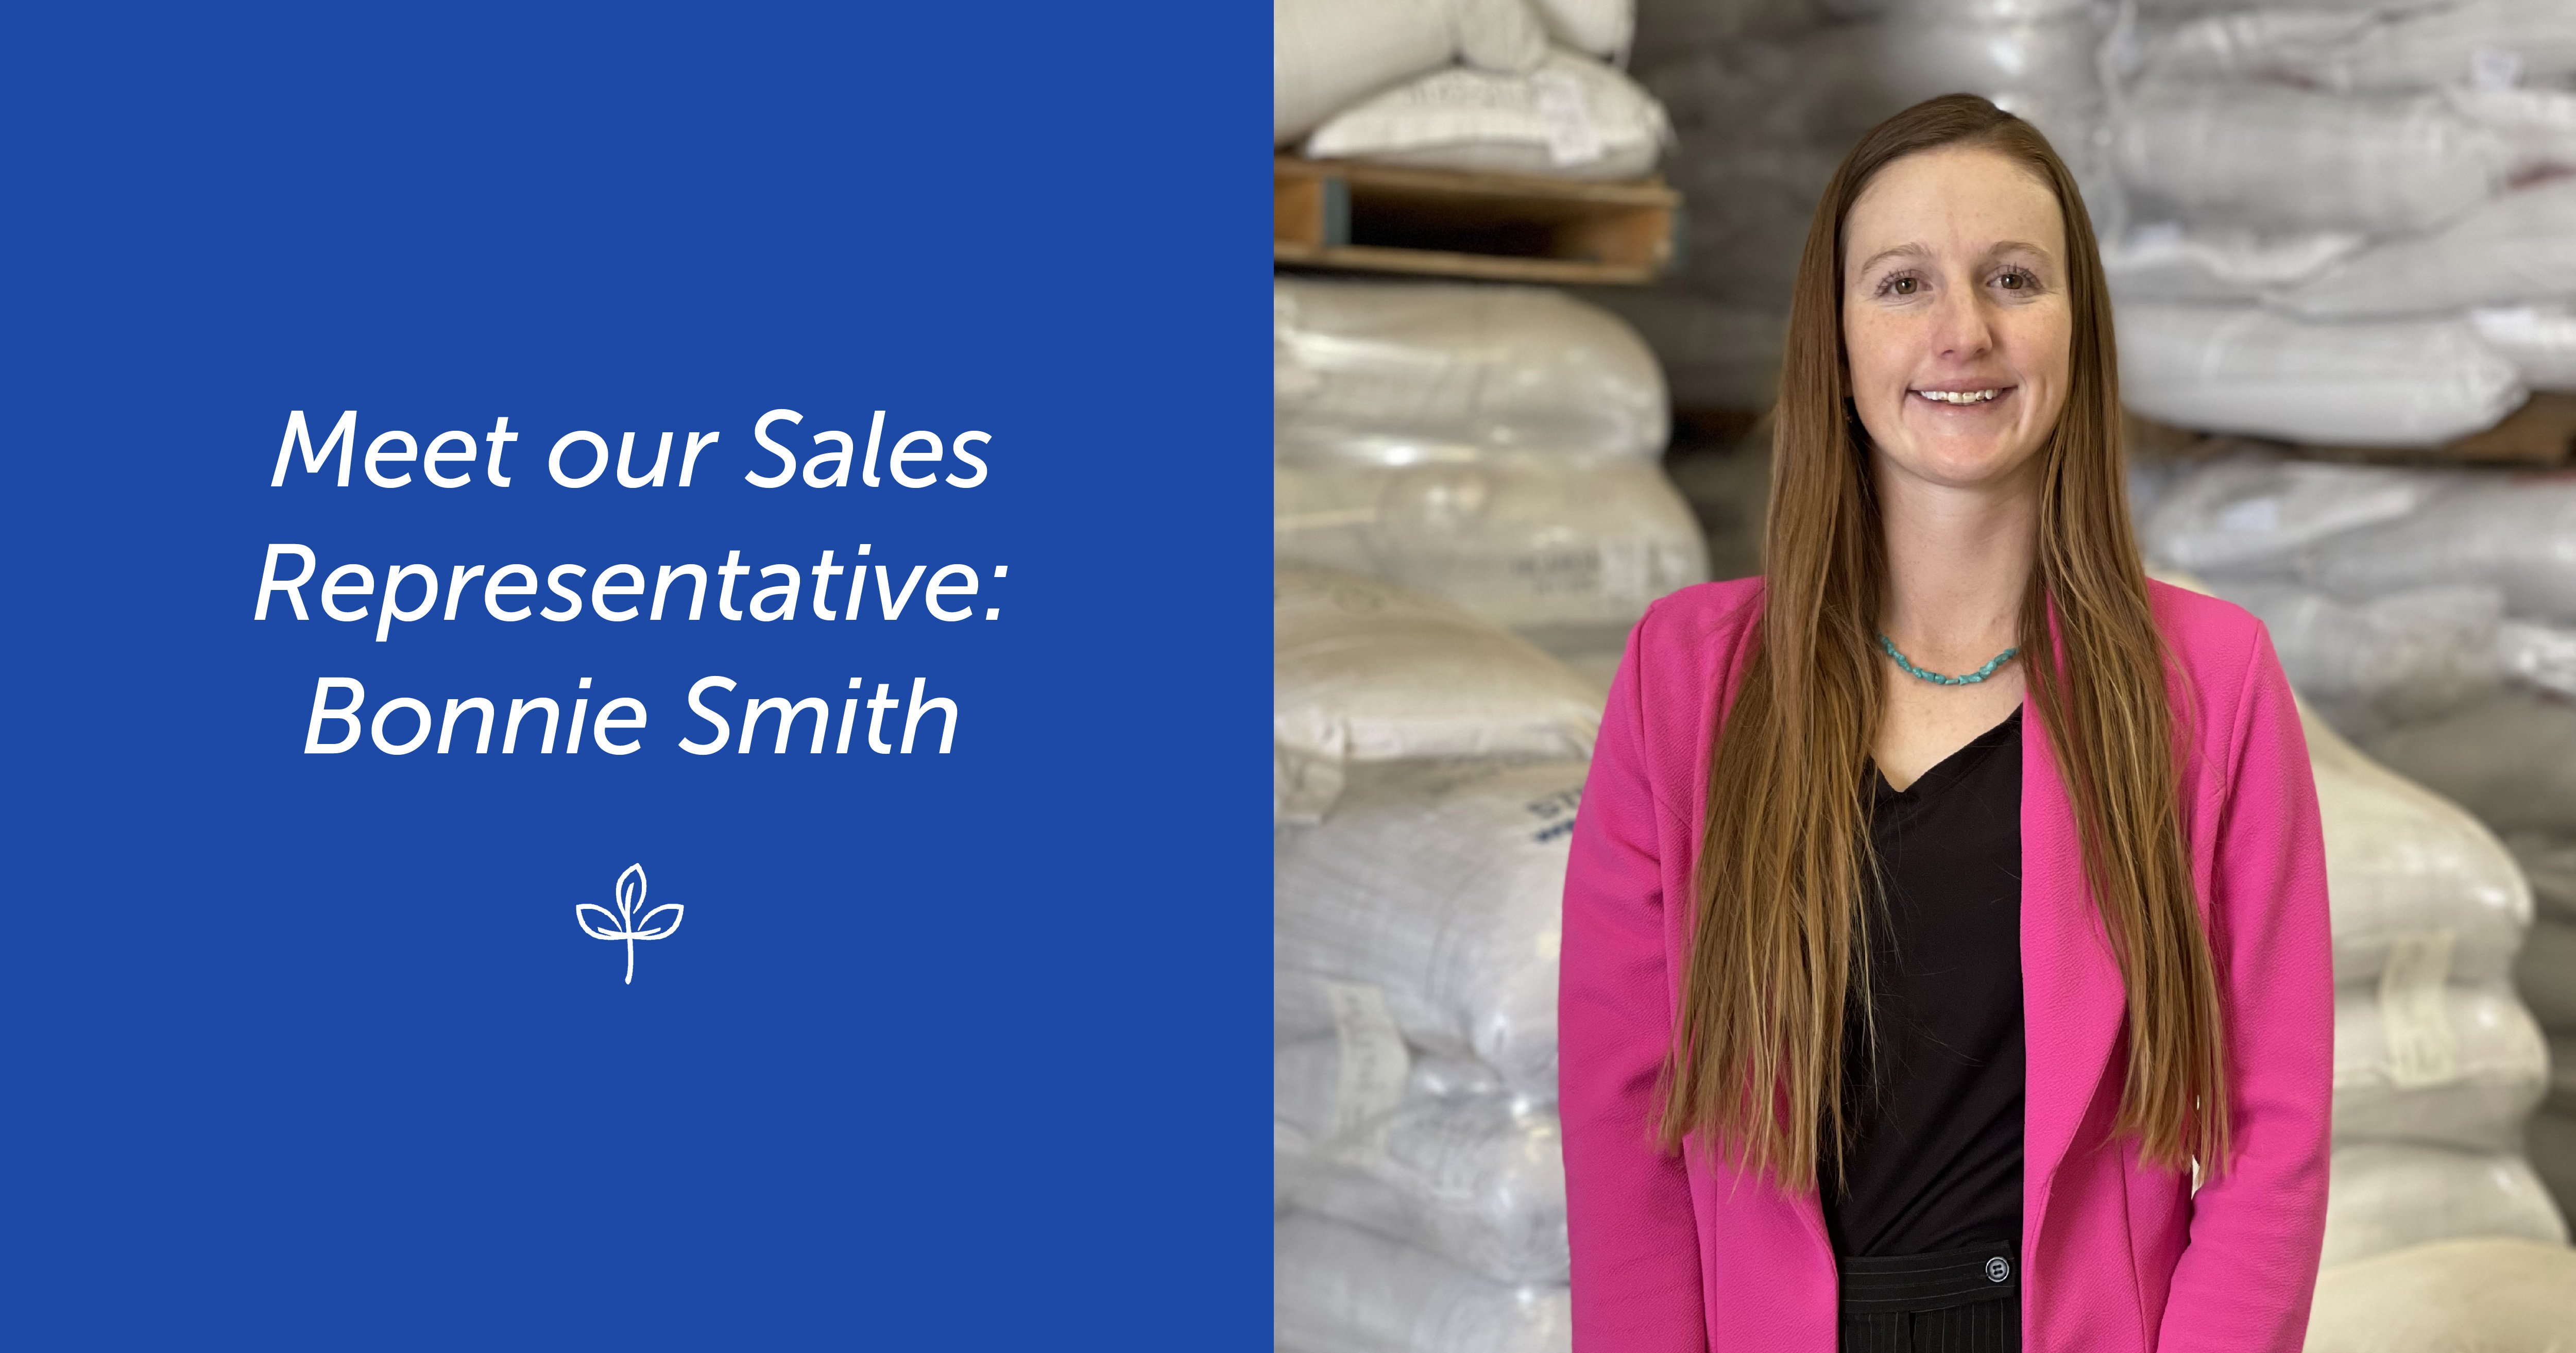 image text that says meet our sales representative: bonnie smith next to a picture of her in the warehouse